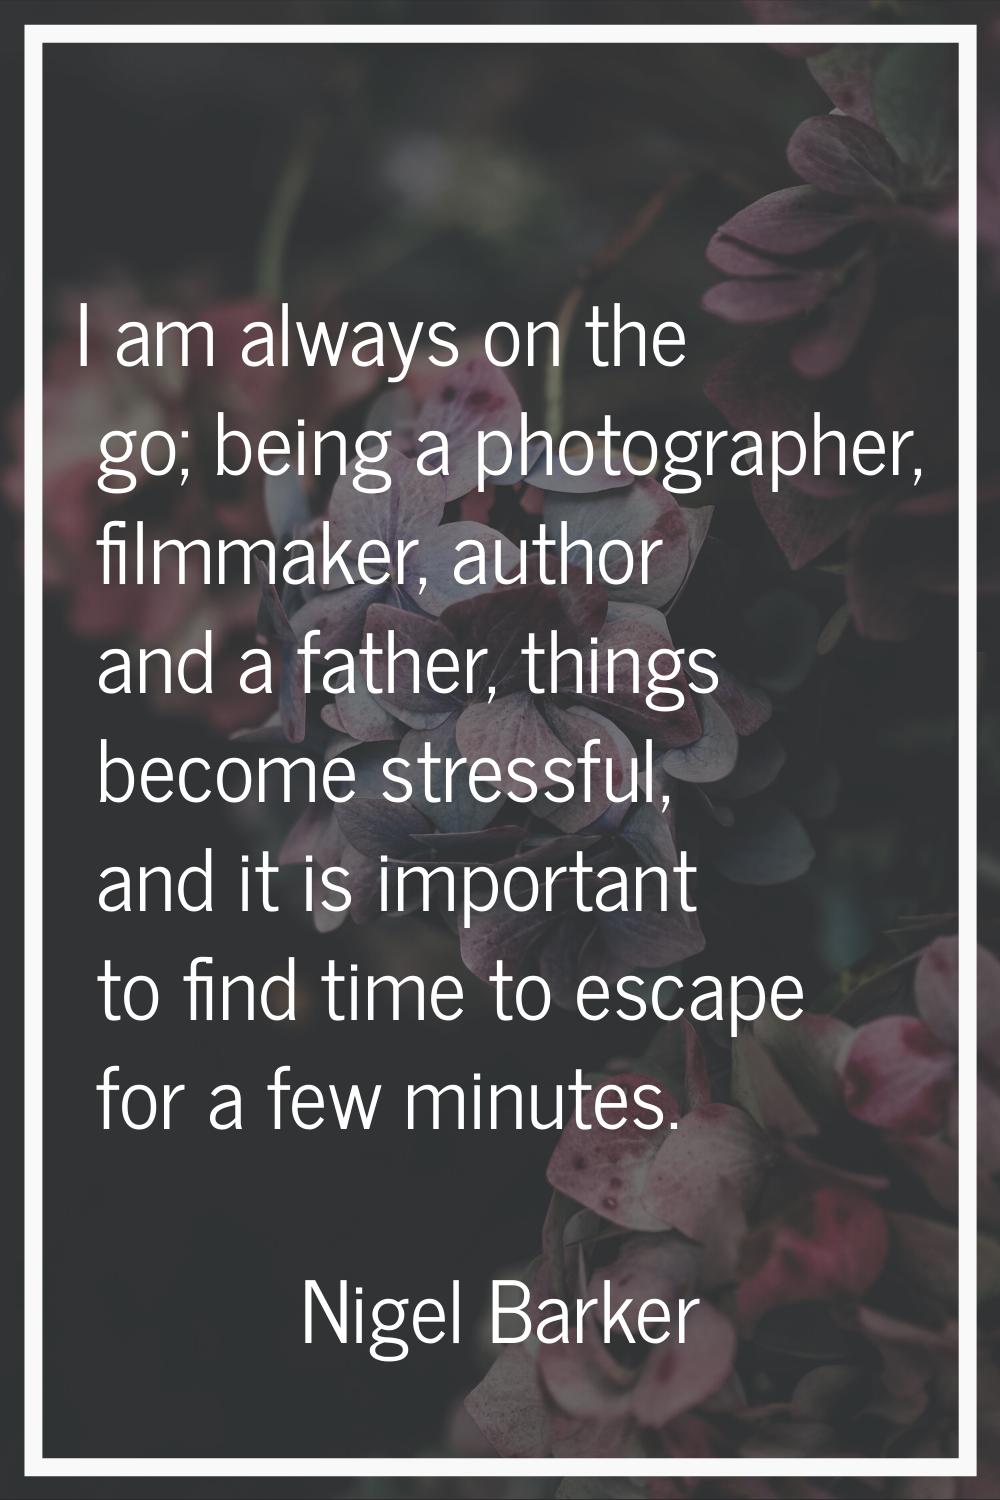 I am always on the go; being a photographer, filmmaker, author and a father, things become stressfu